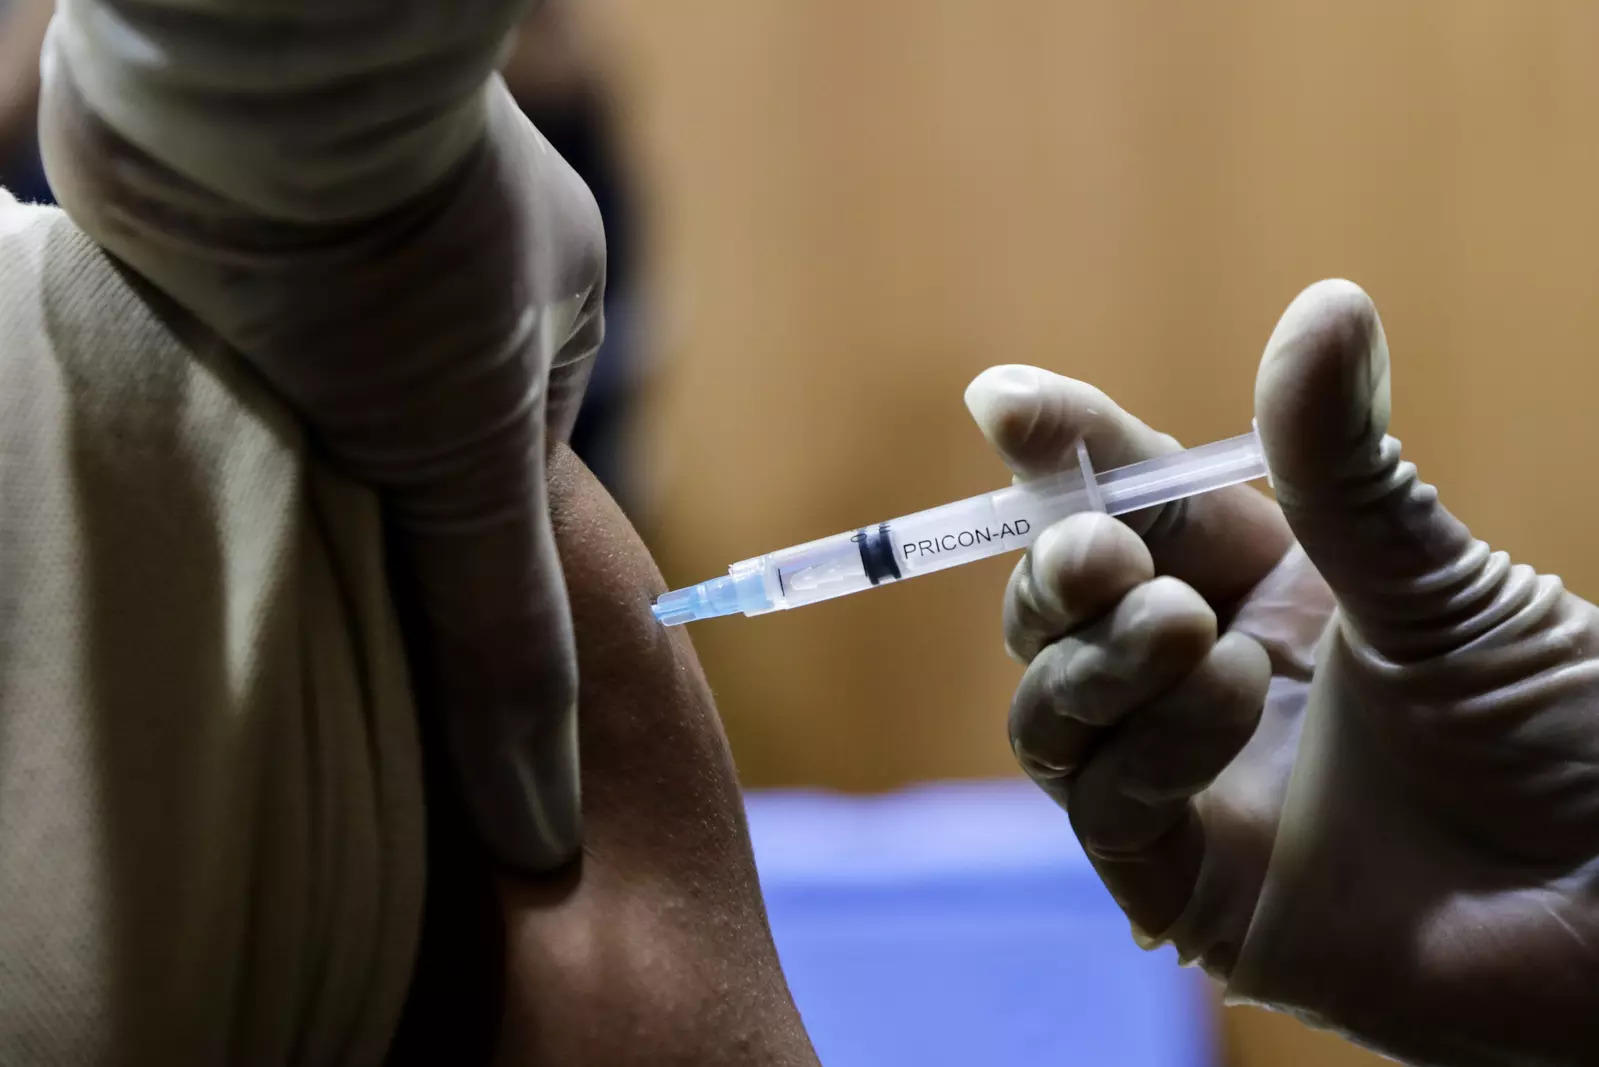 Over one crore vaccine doses administered for 18 to 44 age group